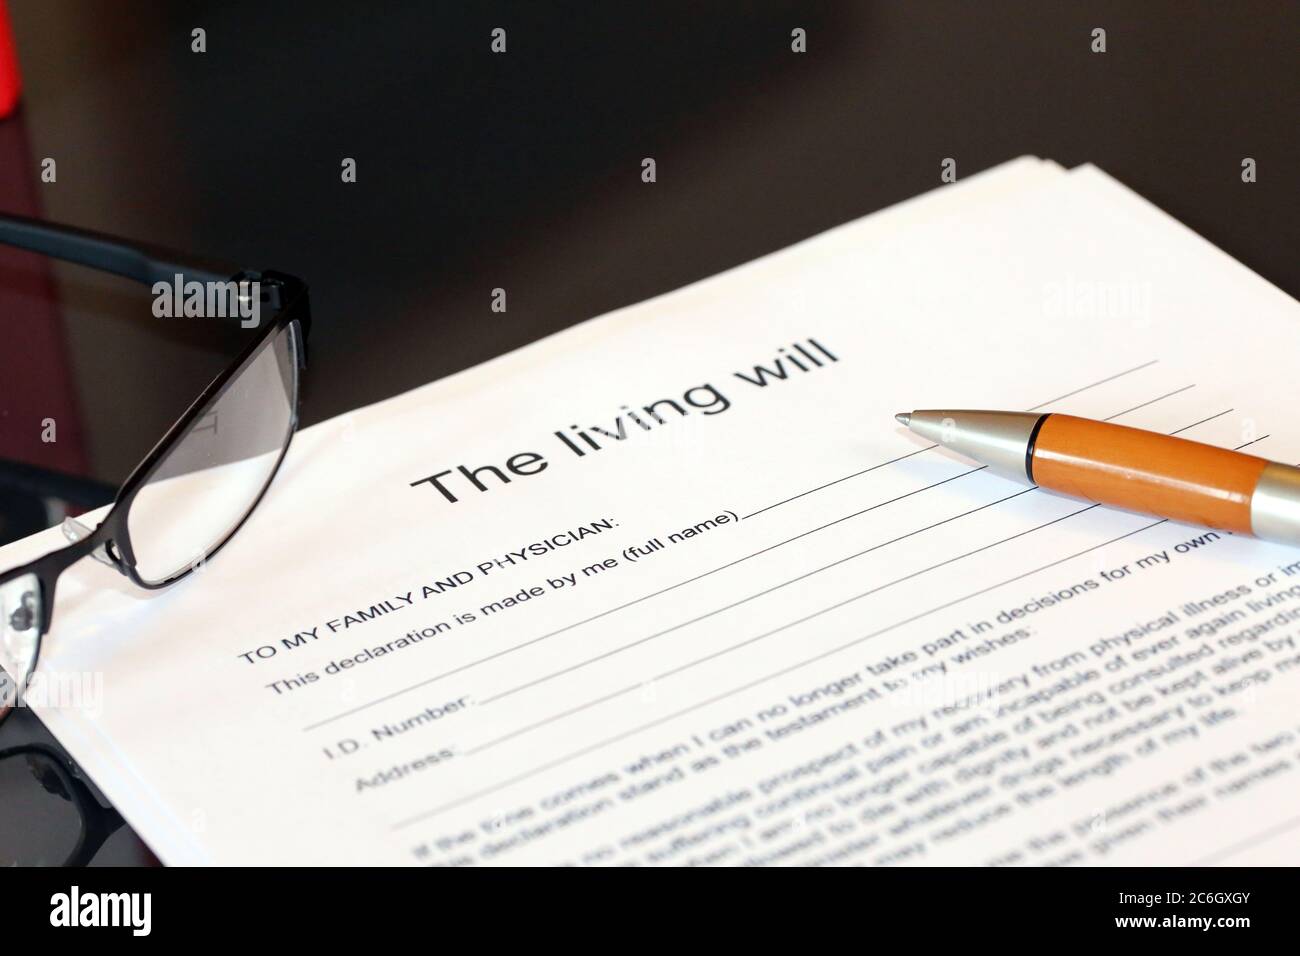 Symbol image: Blank form of the living will on a desk Stock Photo